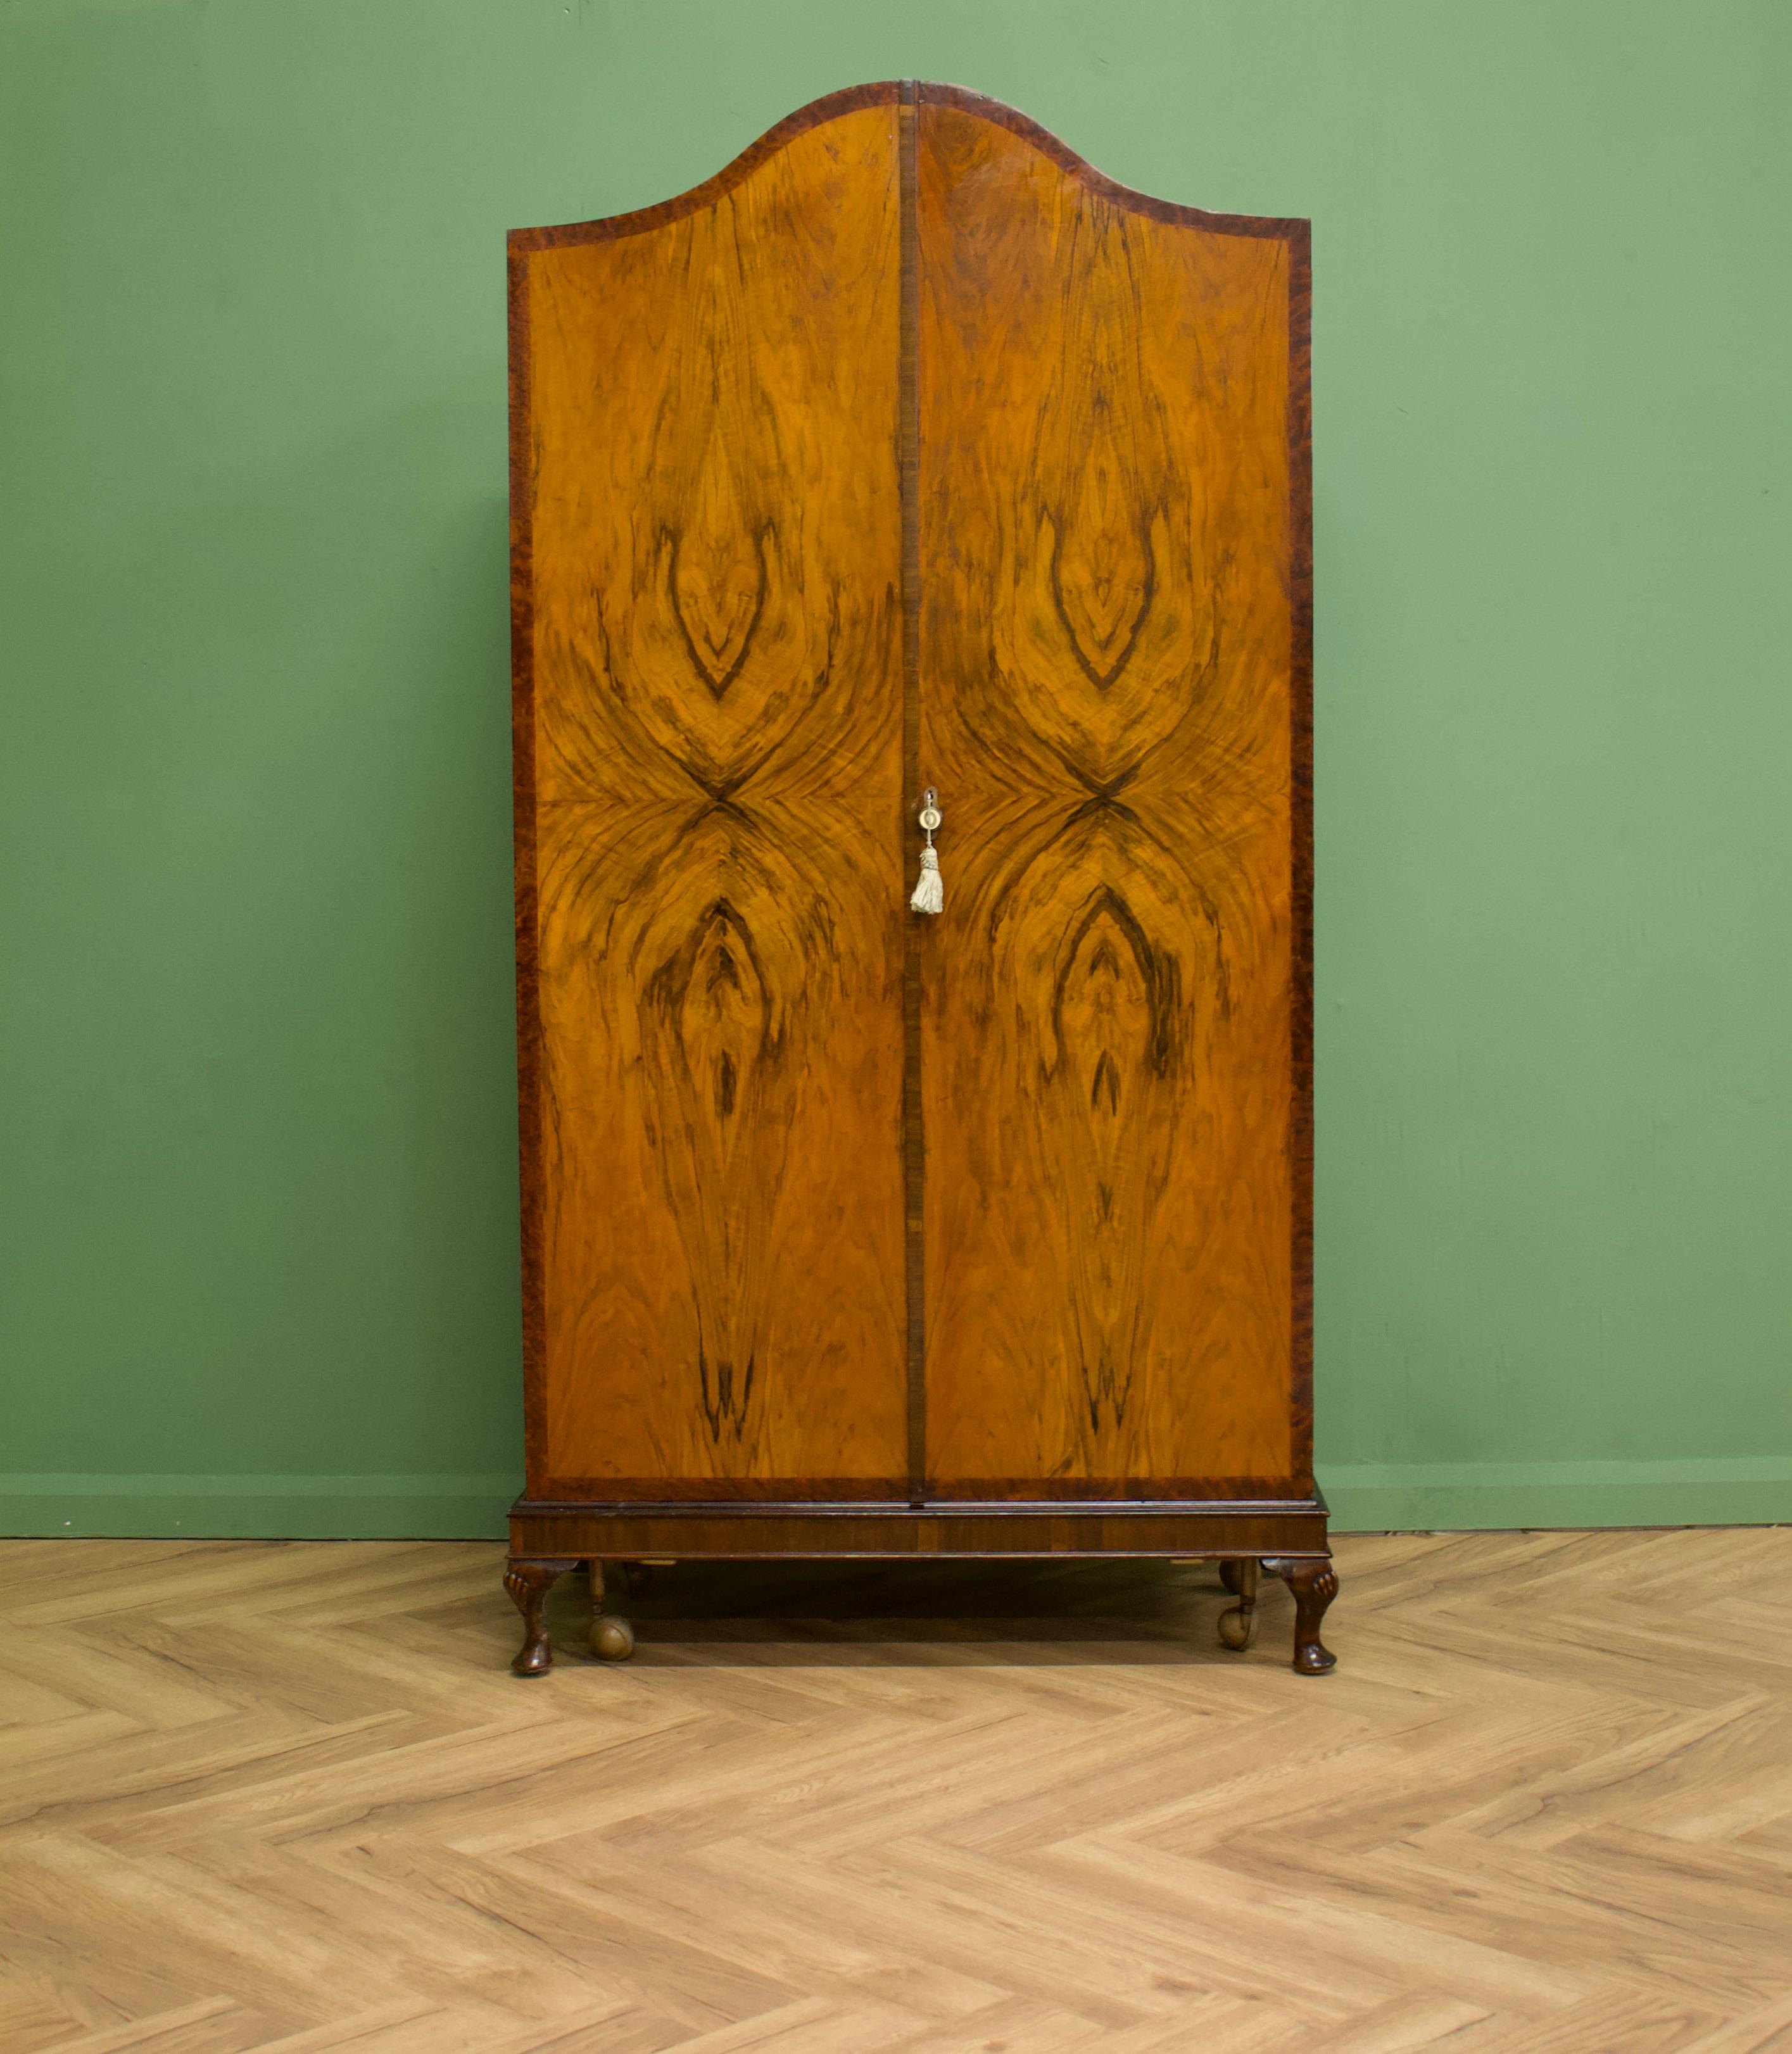 - Art Deco wardrobe
- Manufactured in the UK - in the style of Waring and Gillow
- Made from solid wood and burr walnut veneers
- The wardrobe sits on castors which are removable
- Featuring internal full length mirror, a pull out hanging rail,